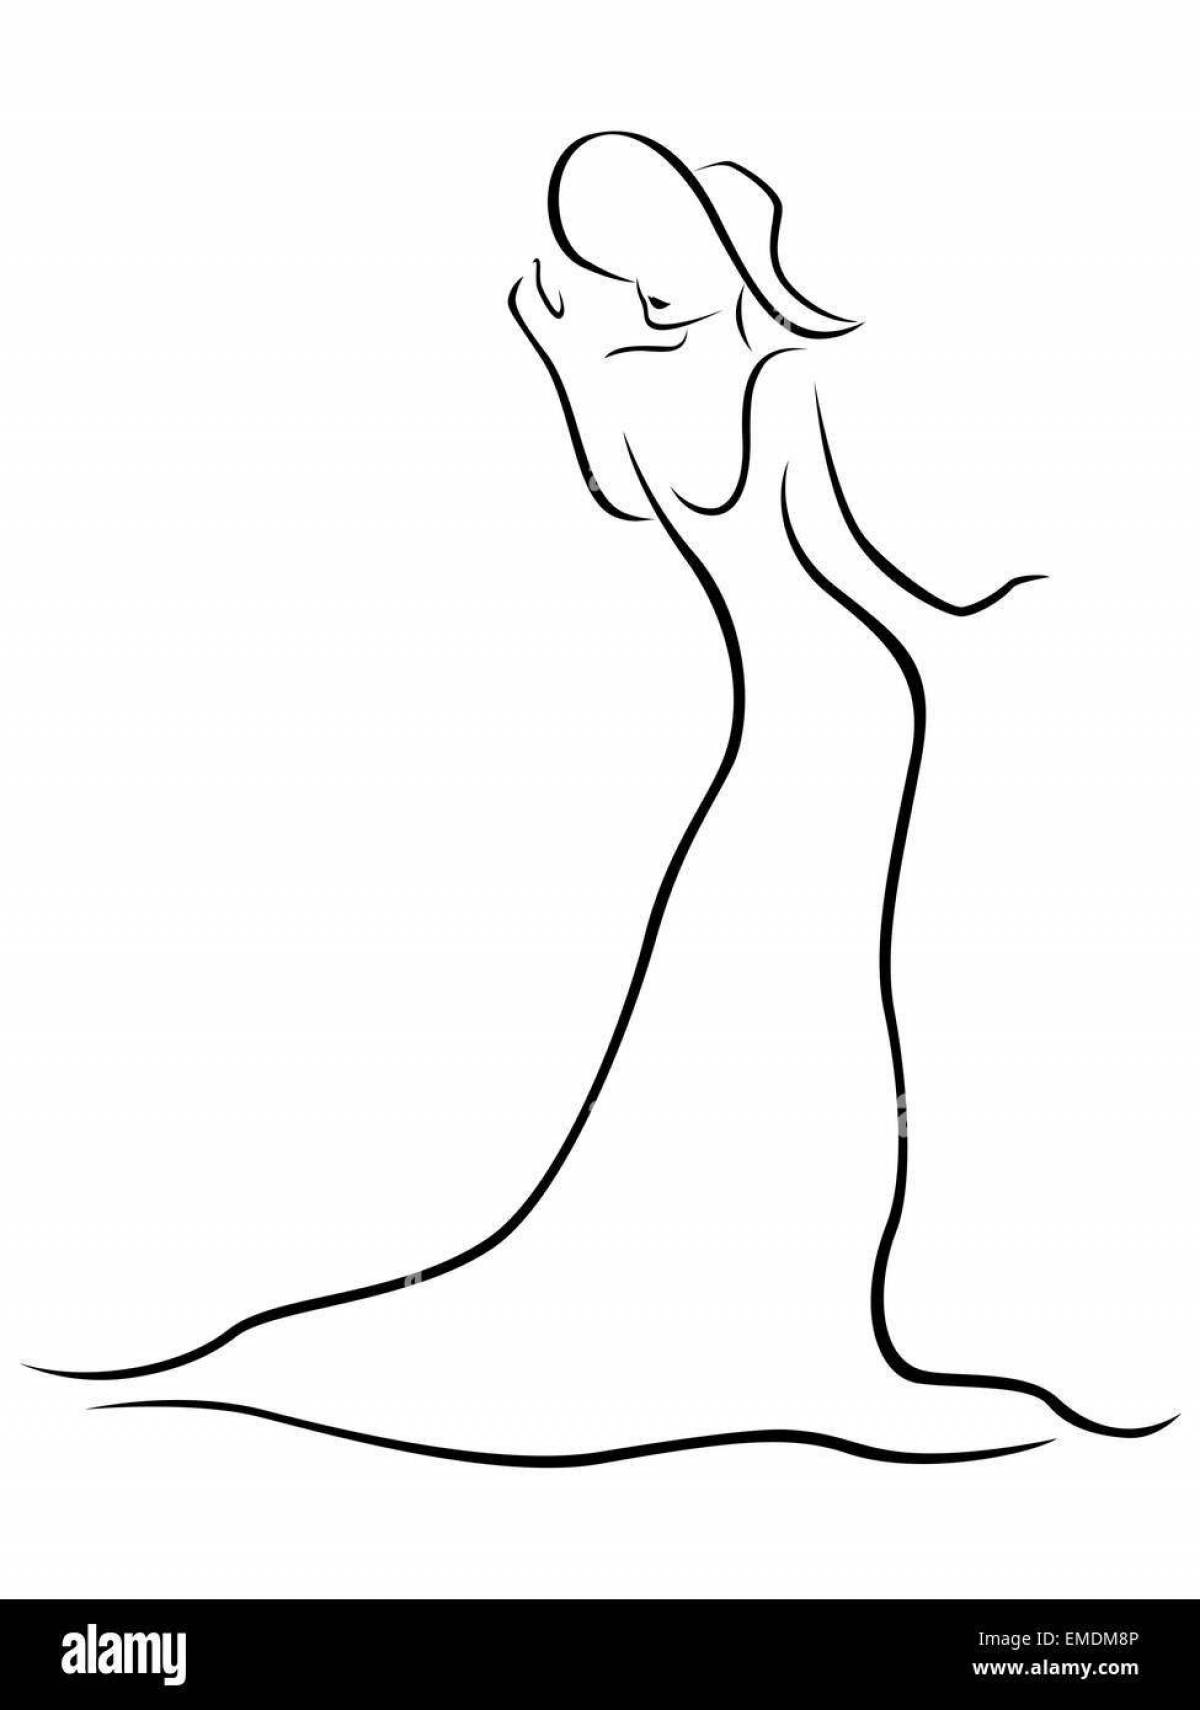 Joyful coloring of the silhouette of a girl in a dress